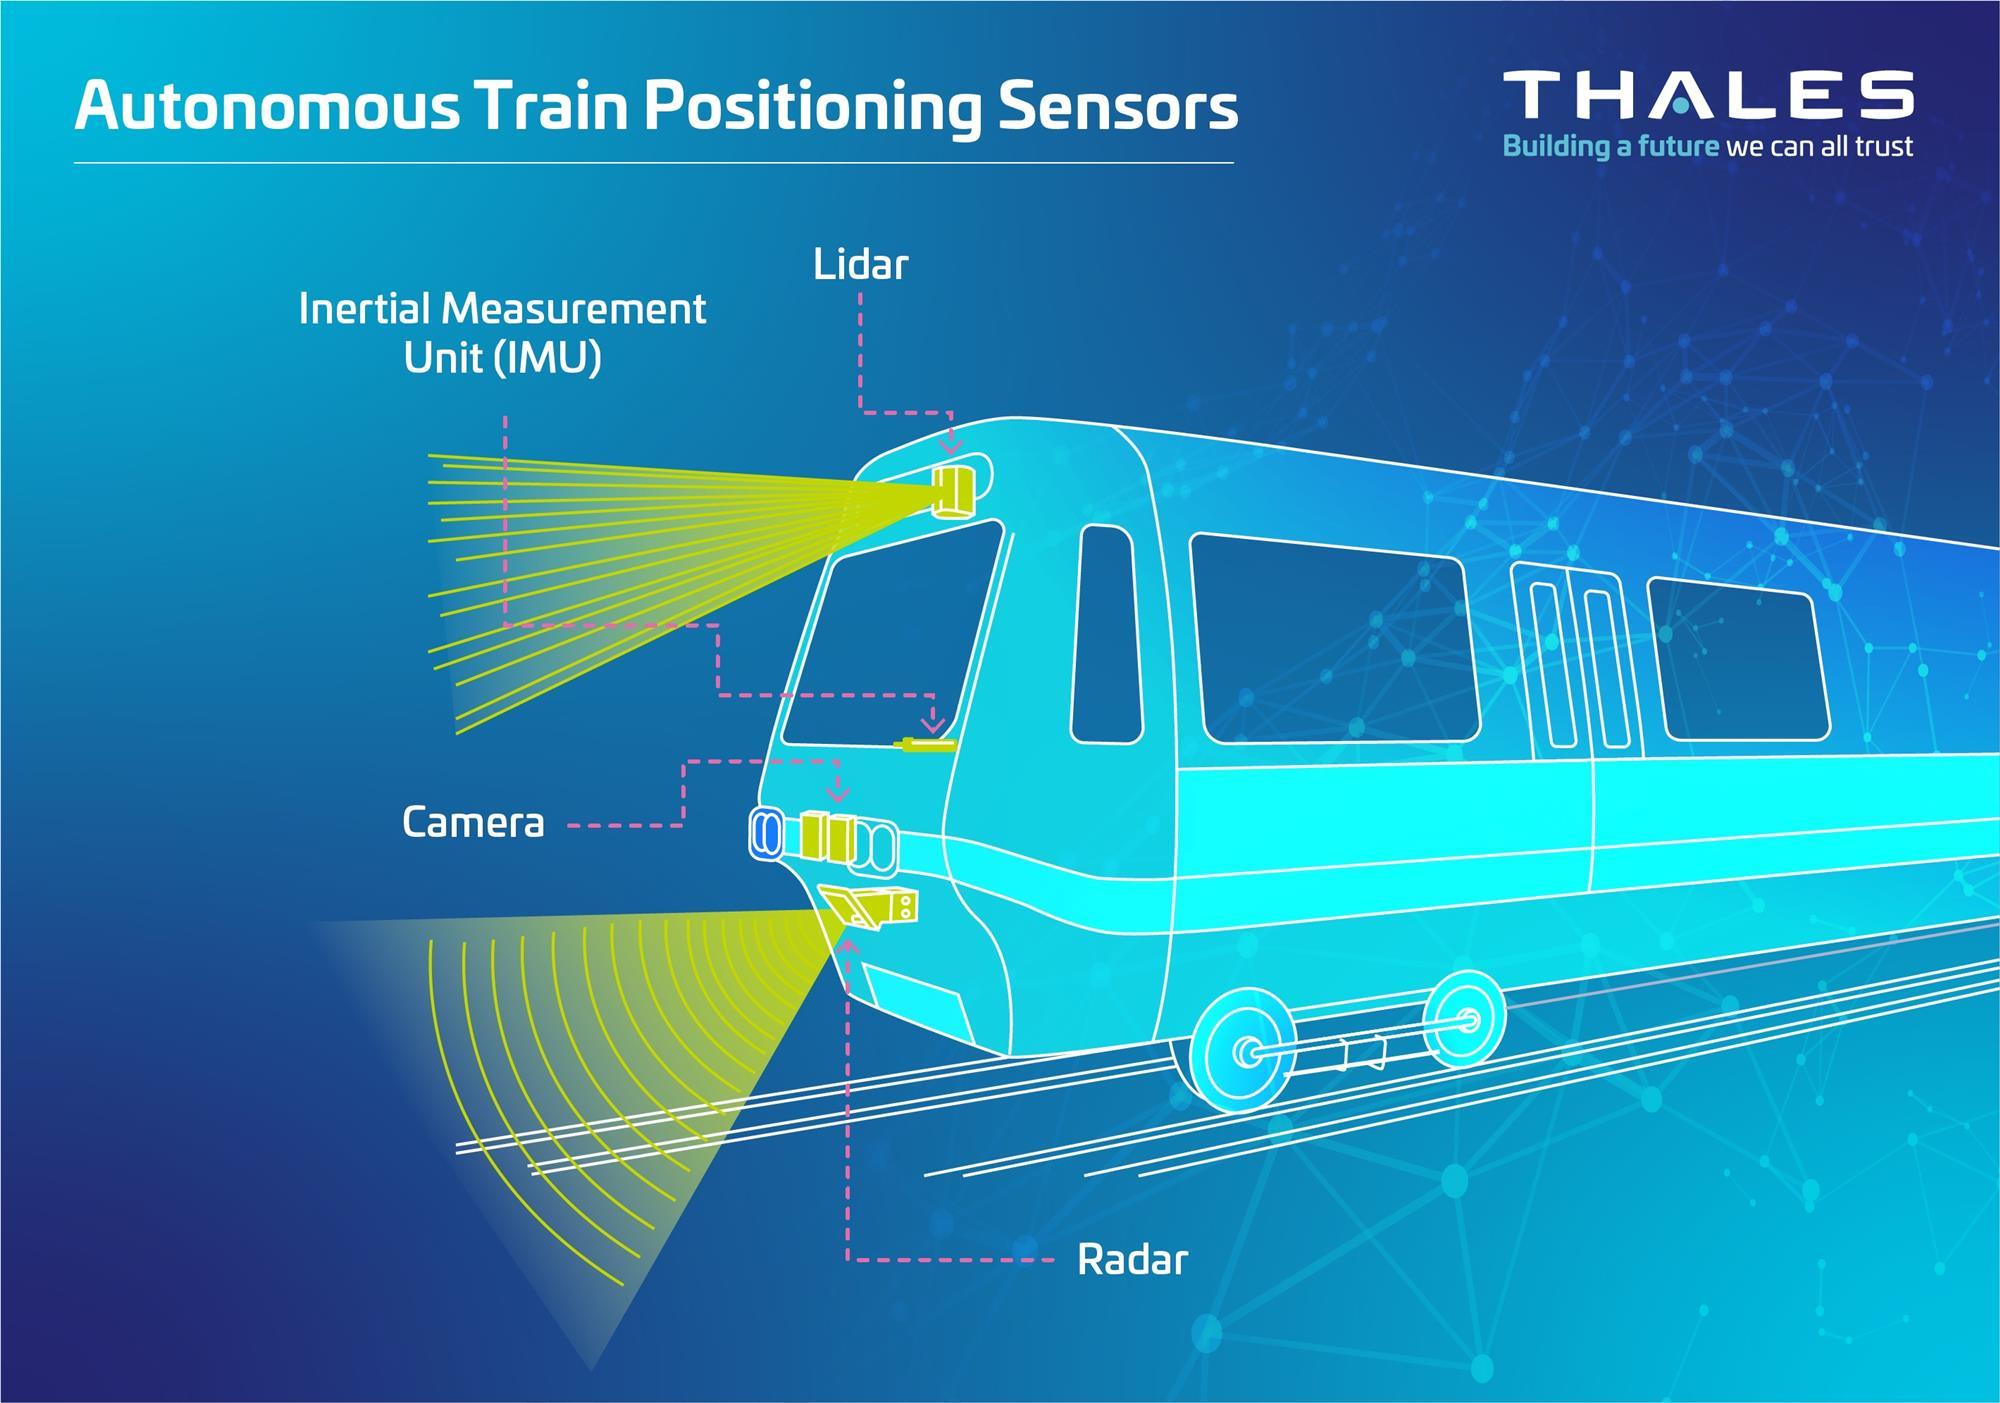 Thales Group and Its Revolutionary Passenger Satisfaction Technology